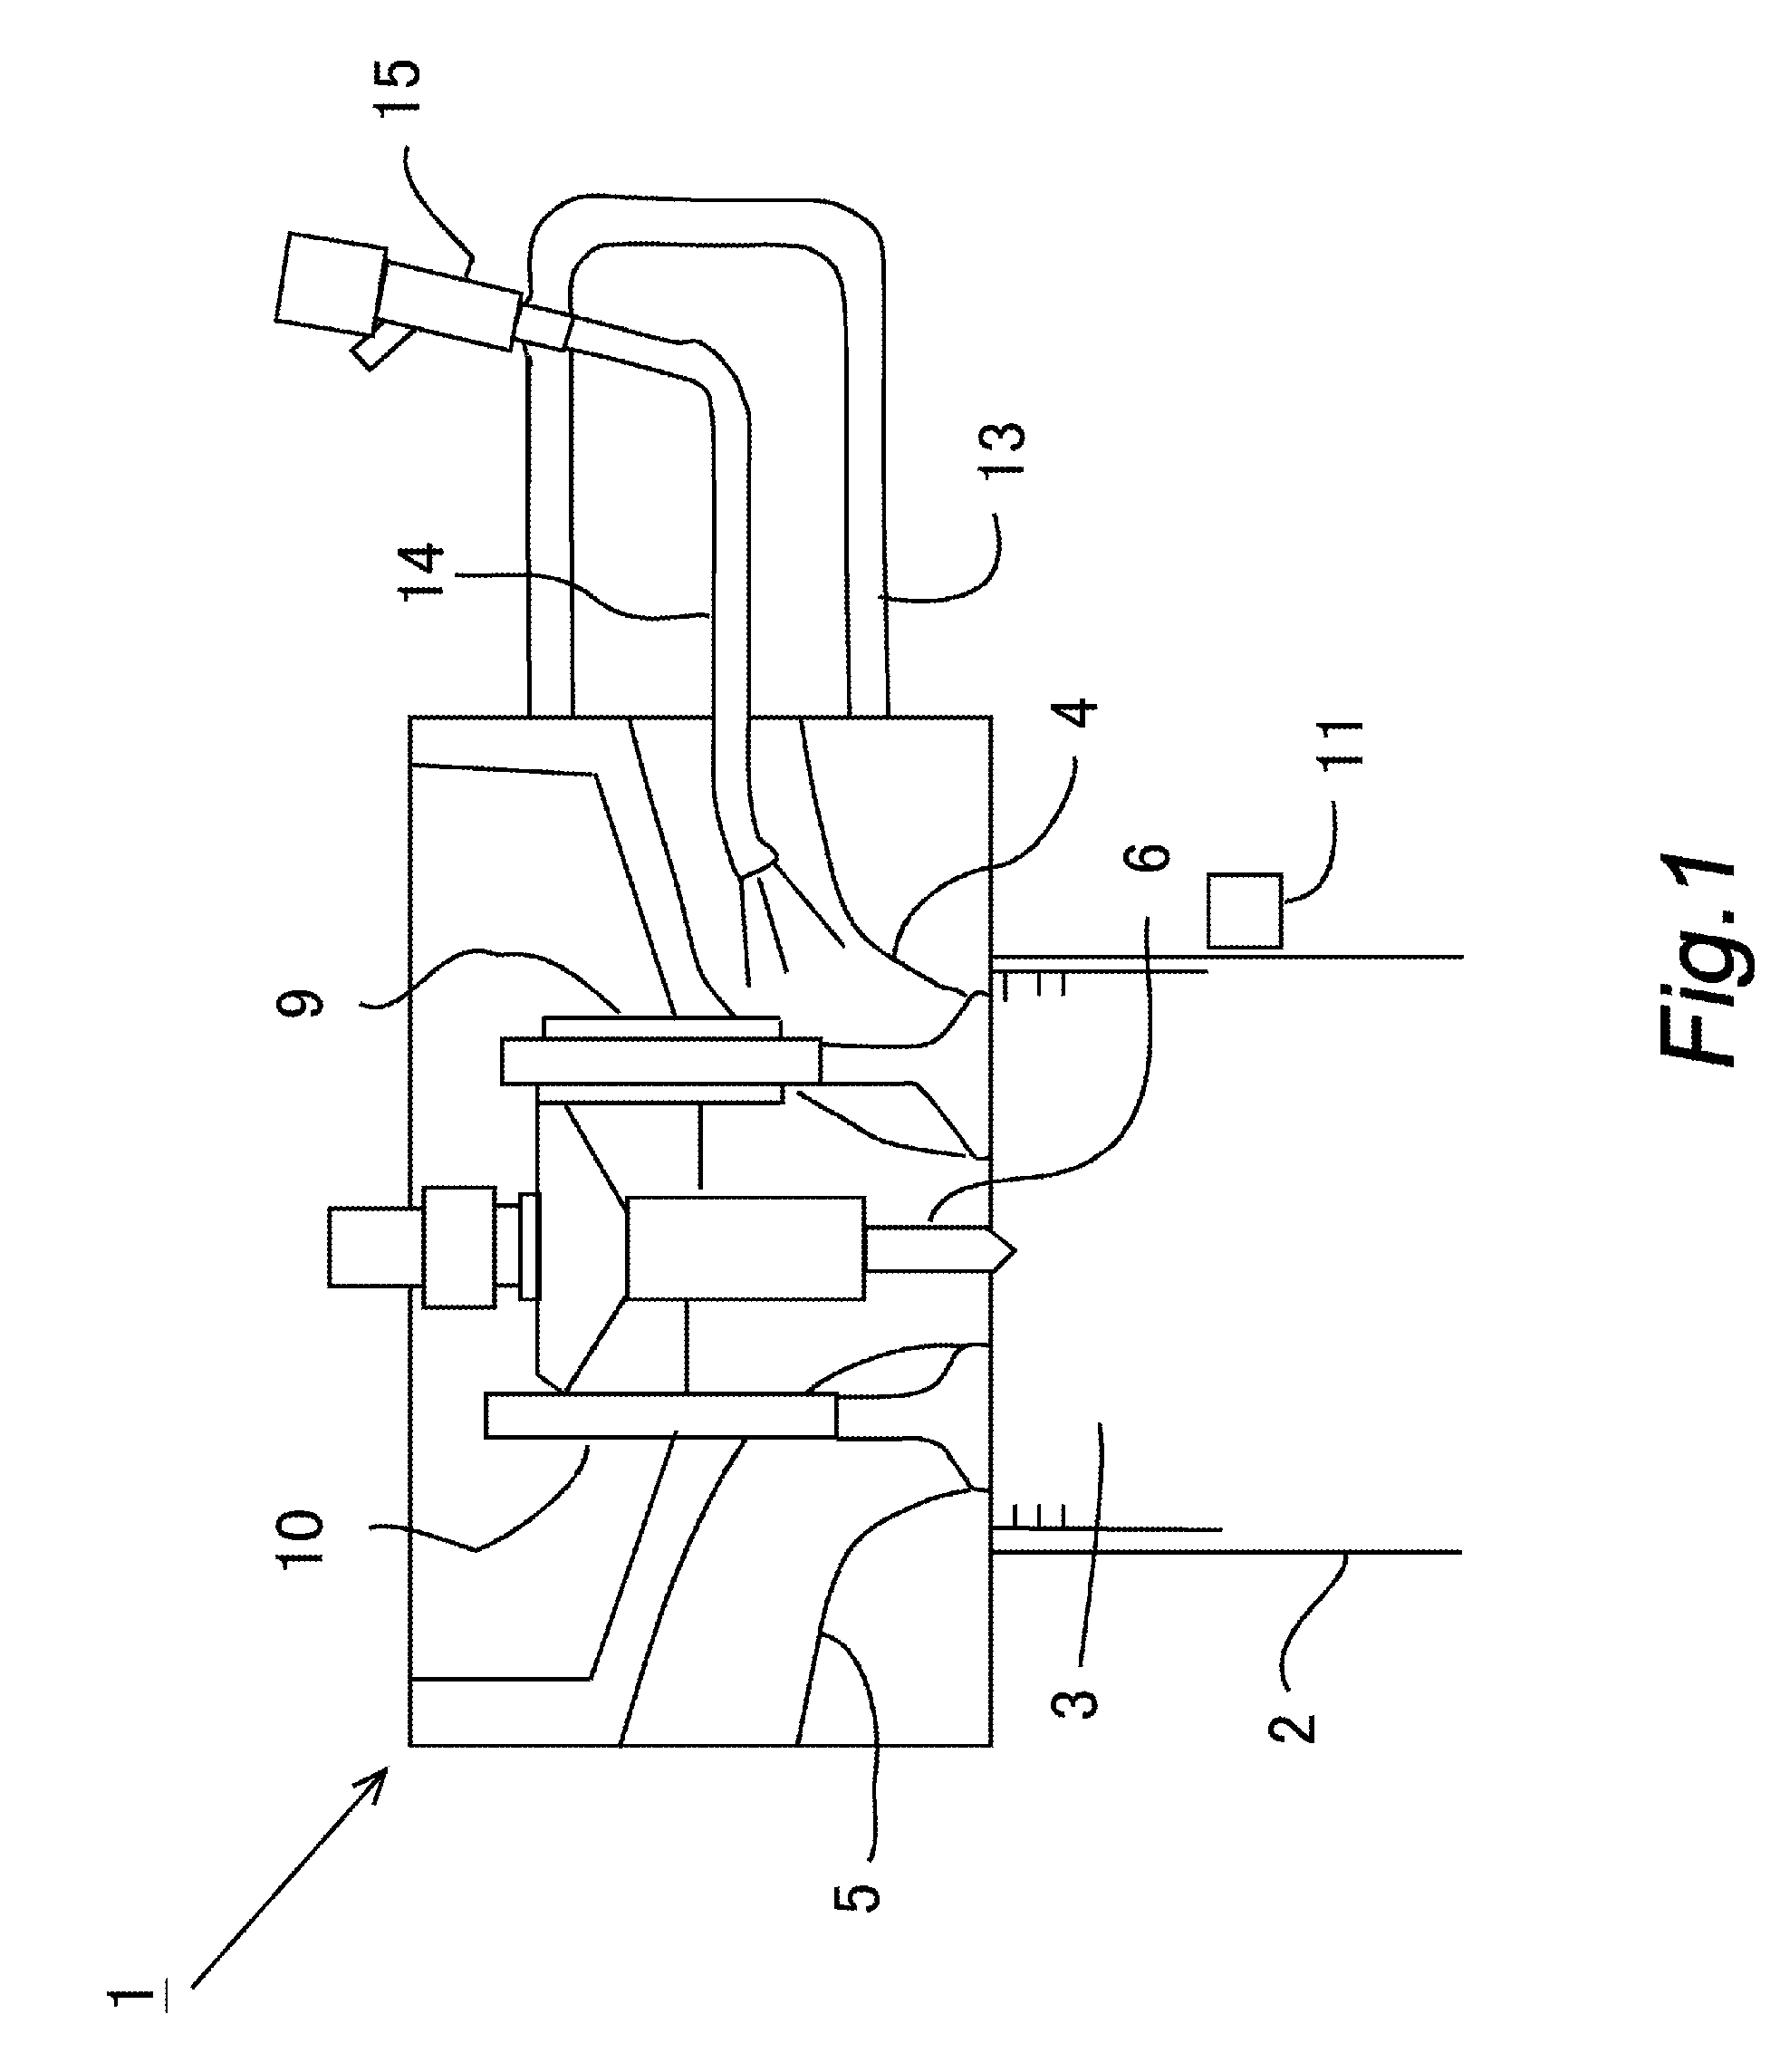 Control apparatus and method for an internal combustion engine